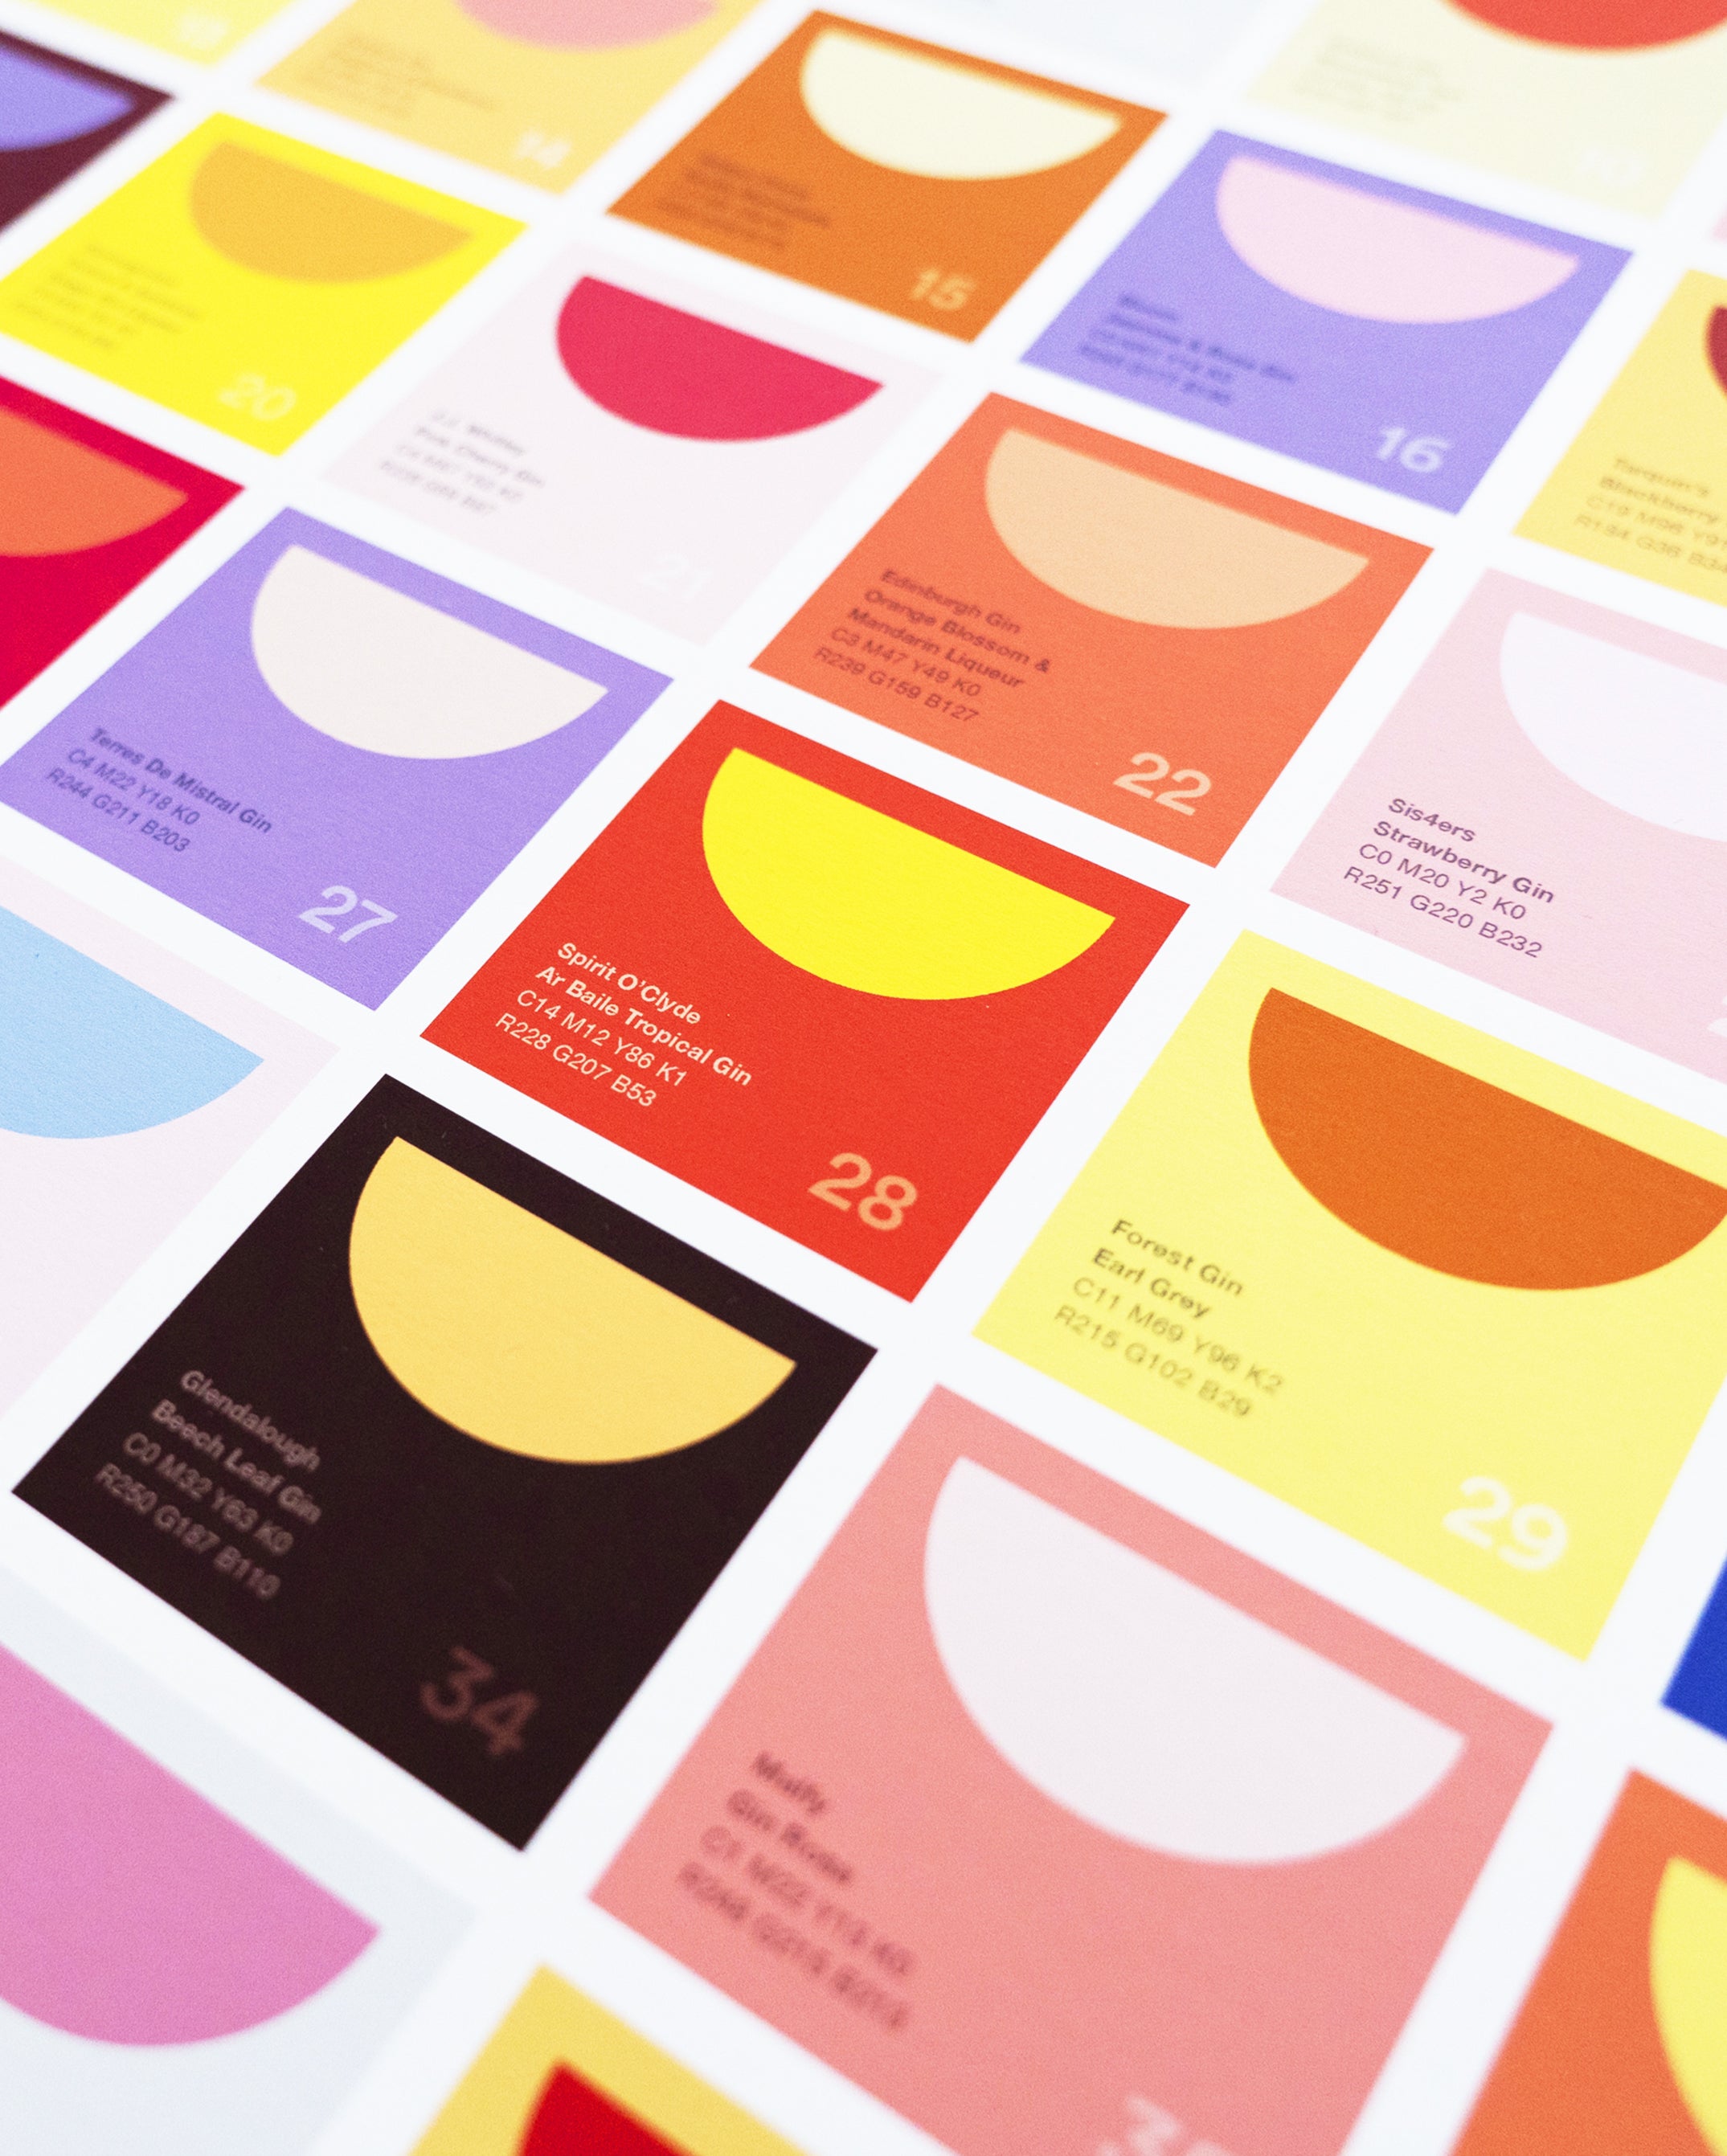 Colour of gin – compilation print